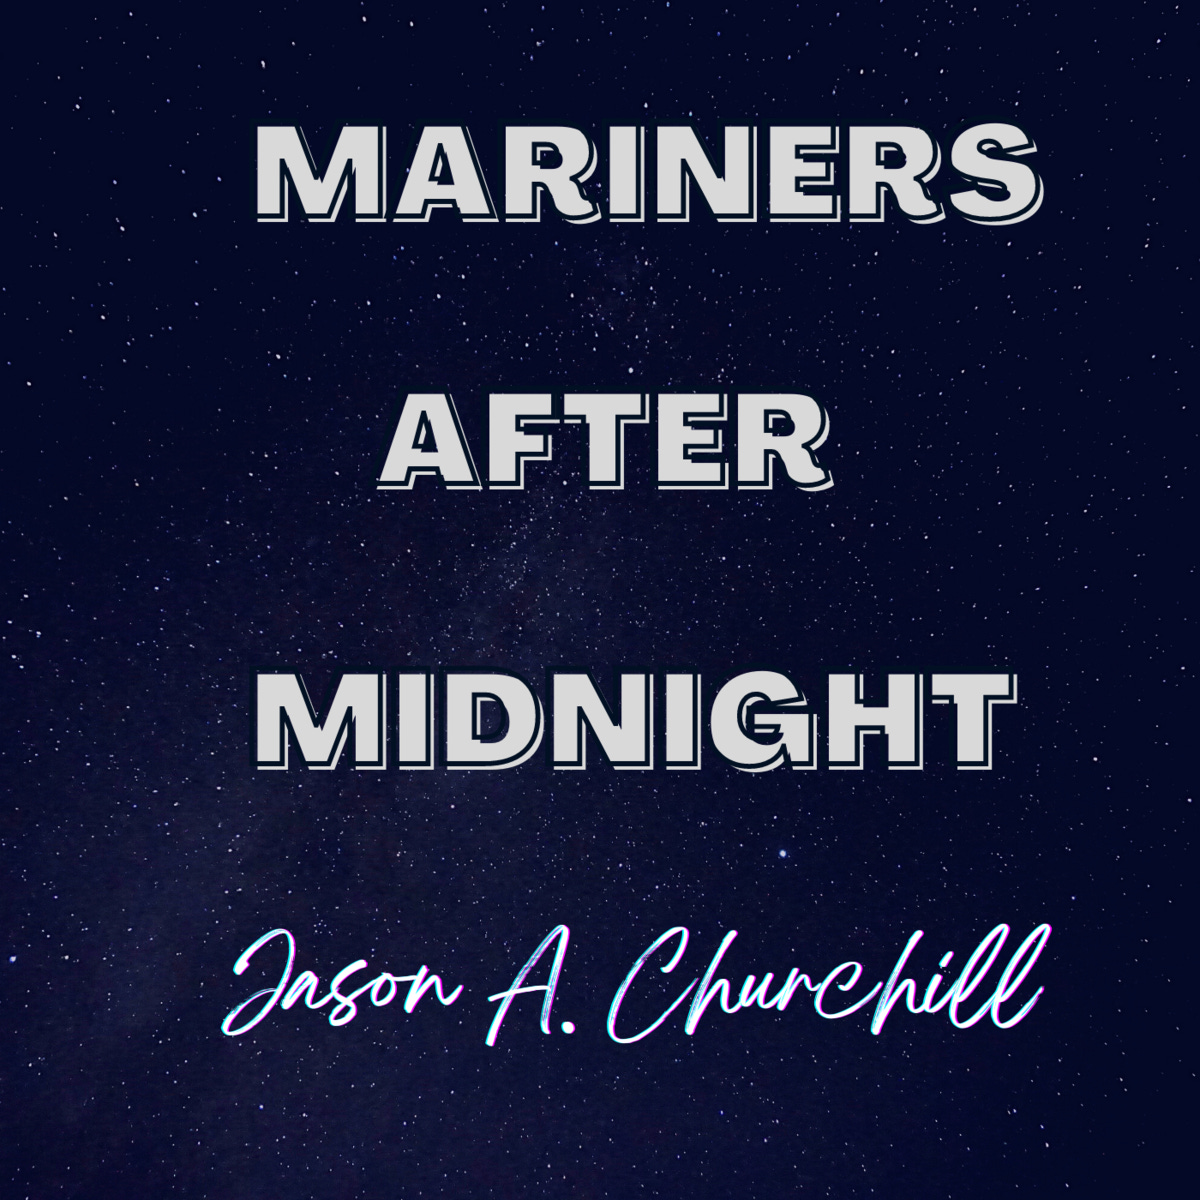 Artwork for Mariners After Midnight